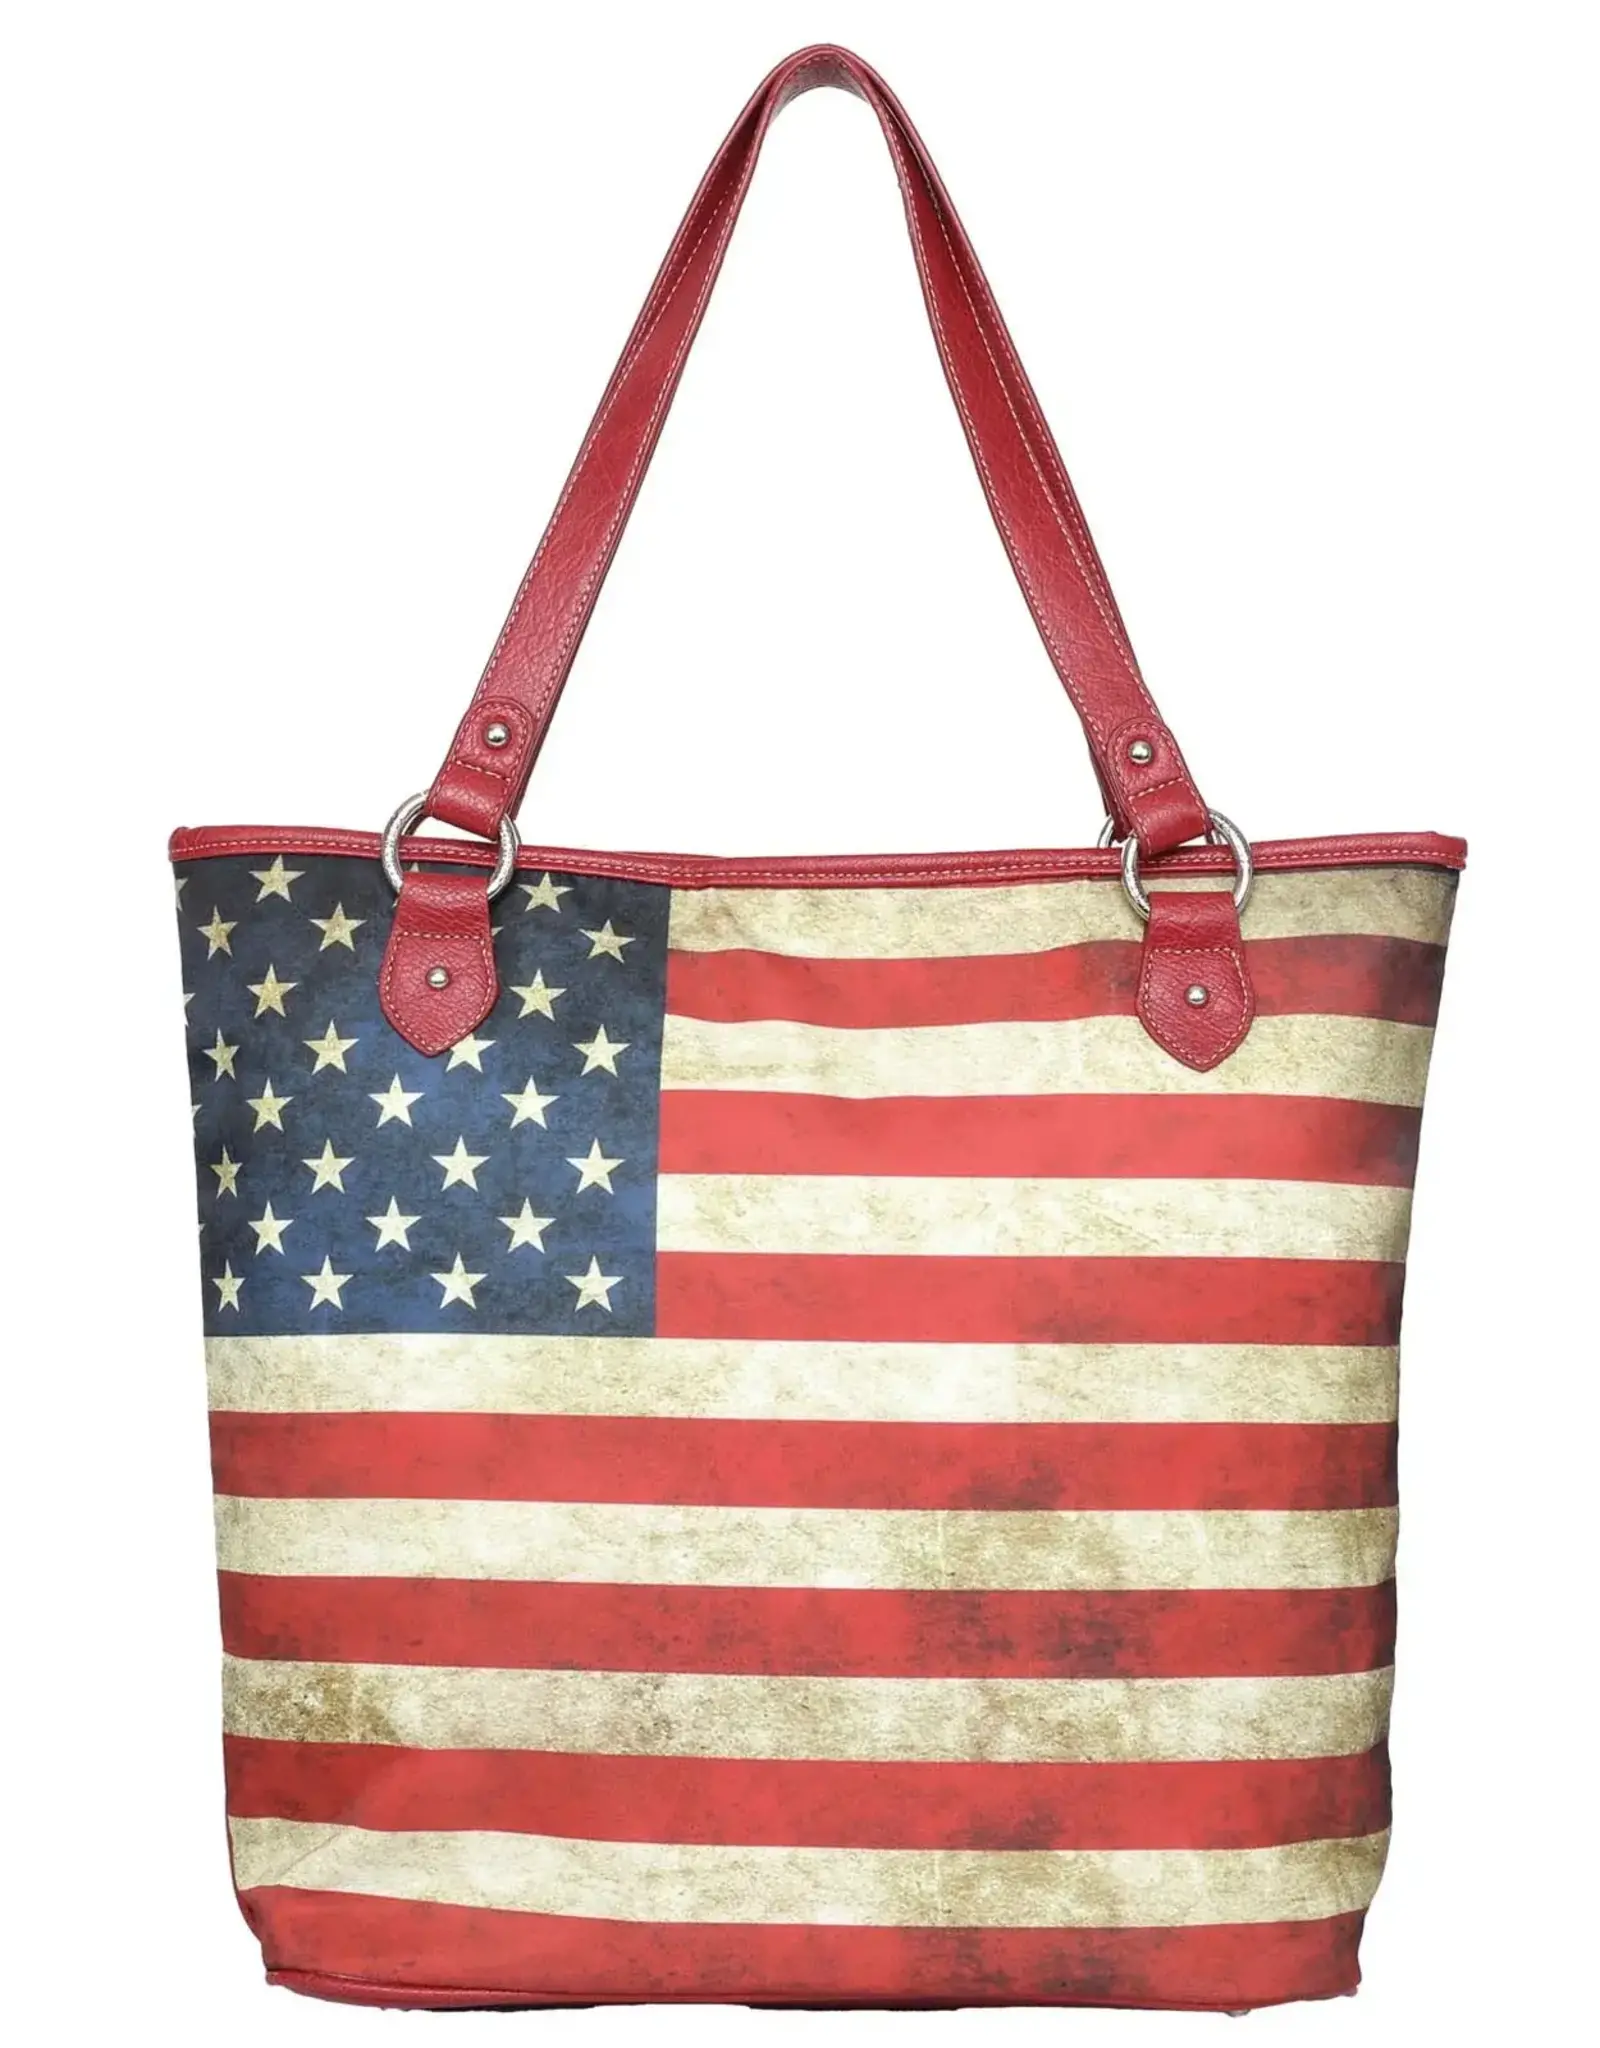 PURSE TOTE AMERICAN FLAG CONCEALED CARRY